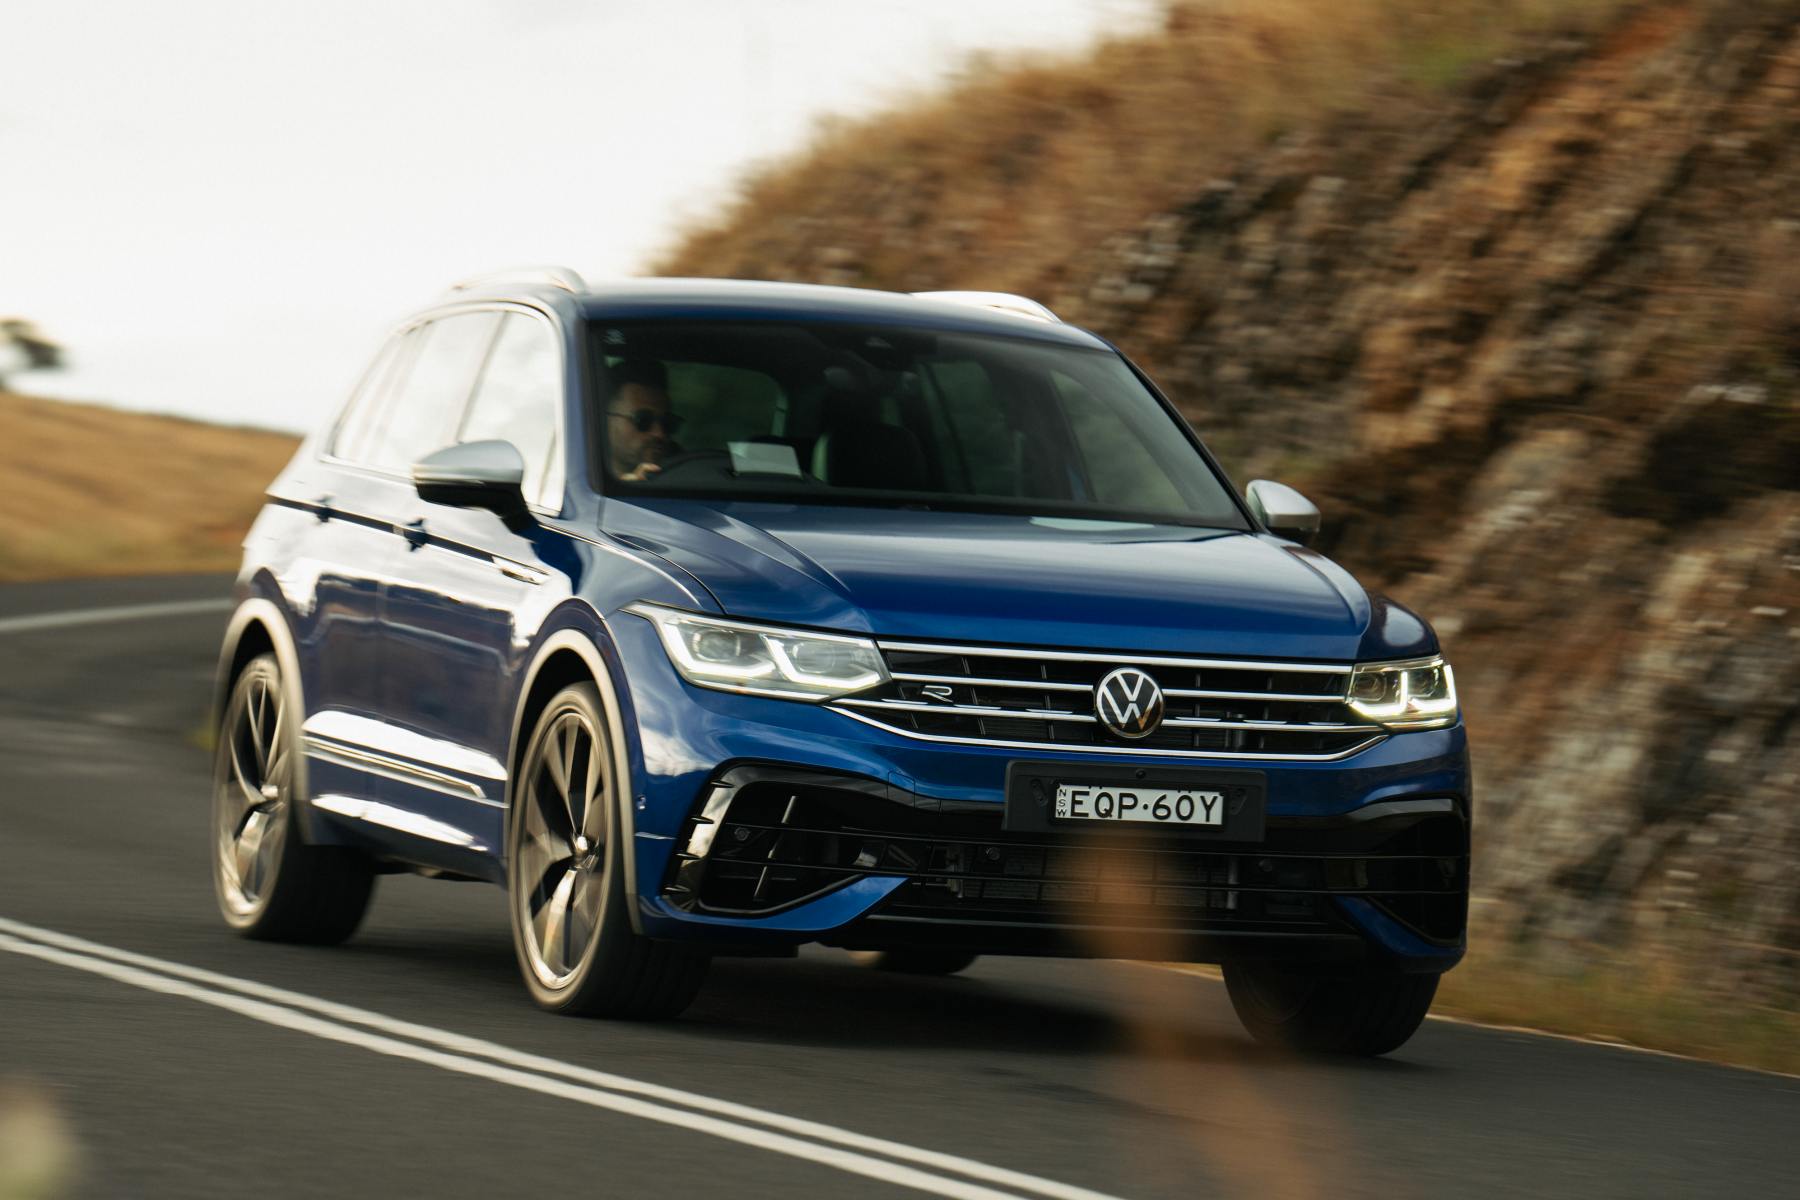 The first-ever ultra high-performance Volkswagen medium SUV – the 235kW/400Nm Tiguan R